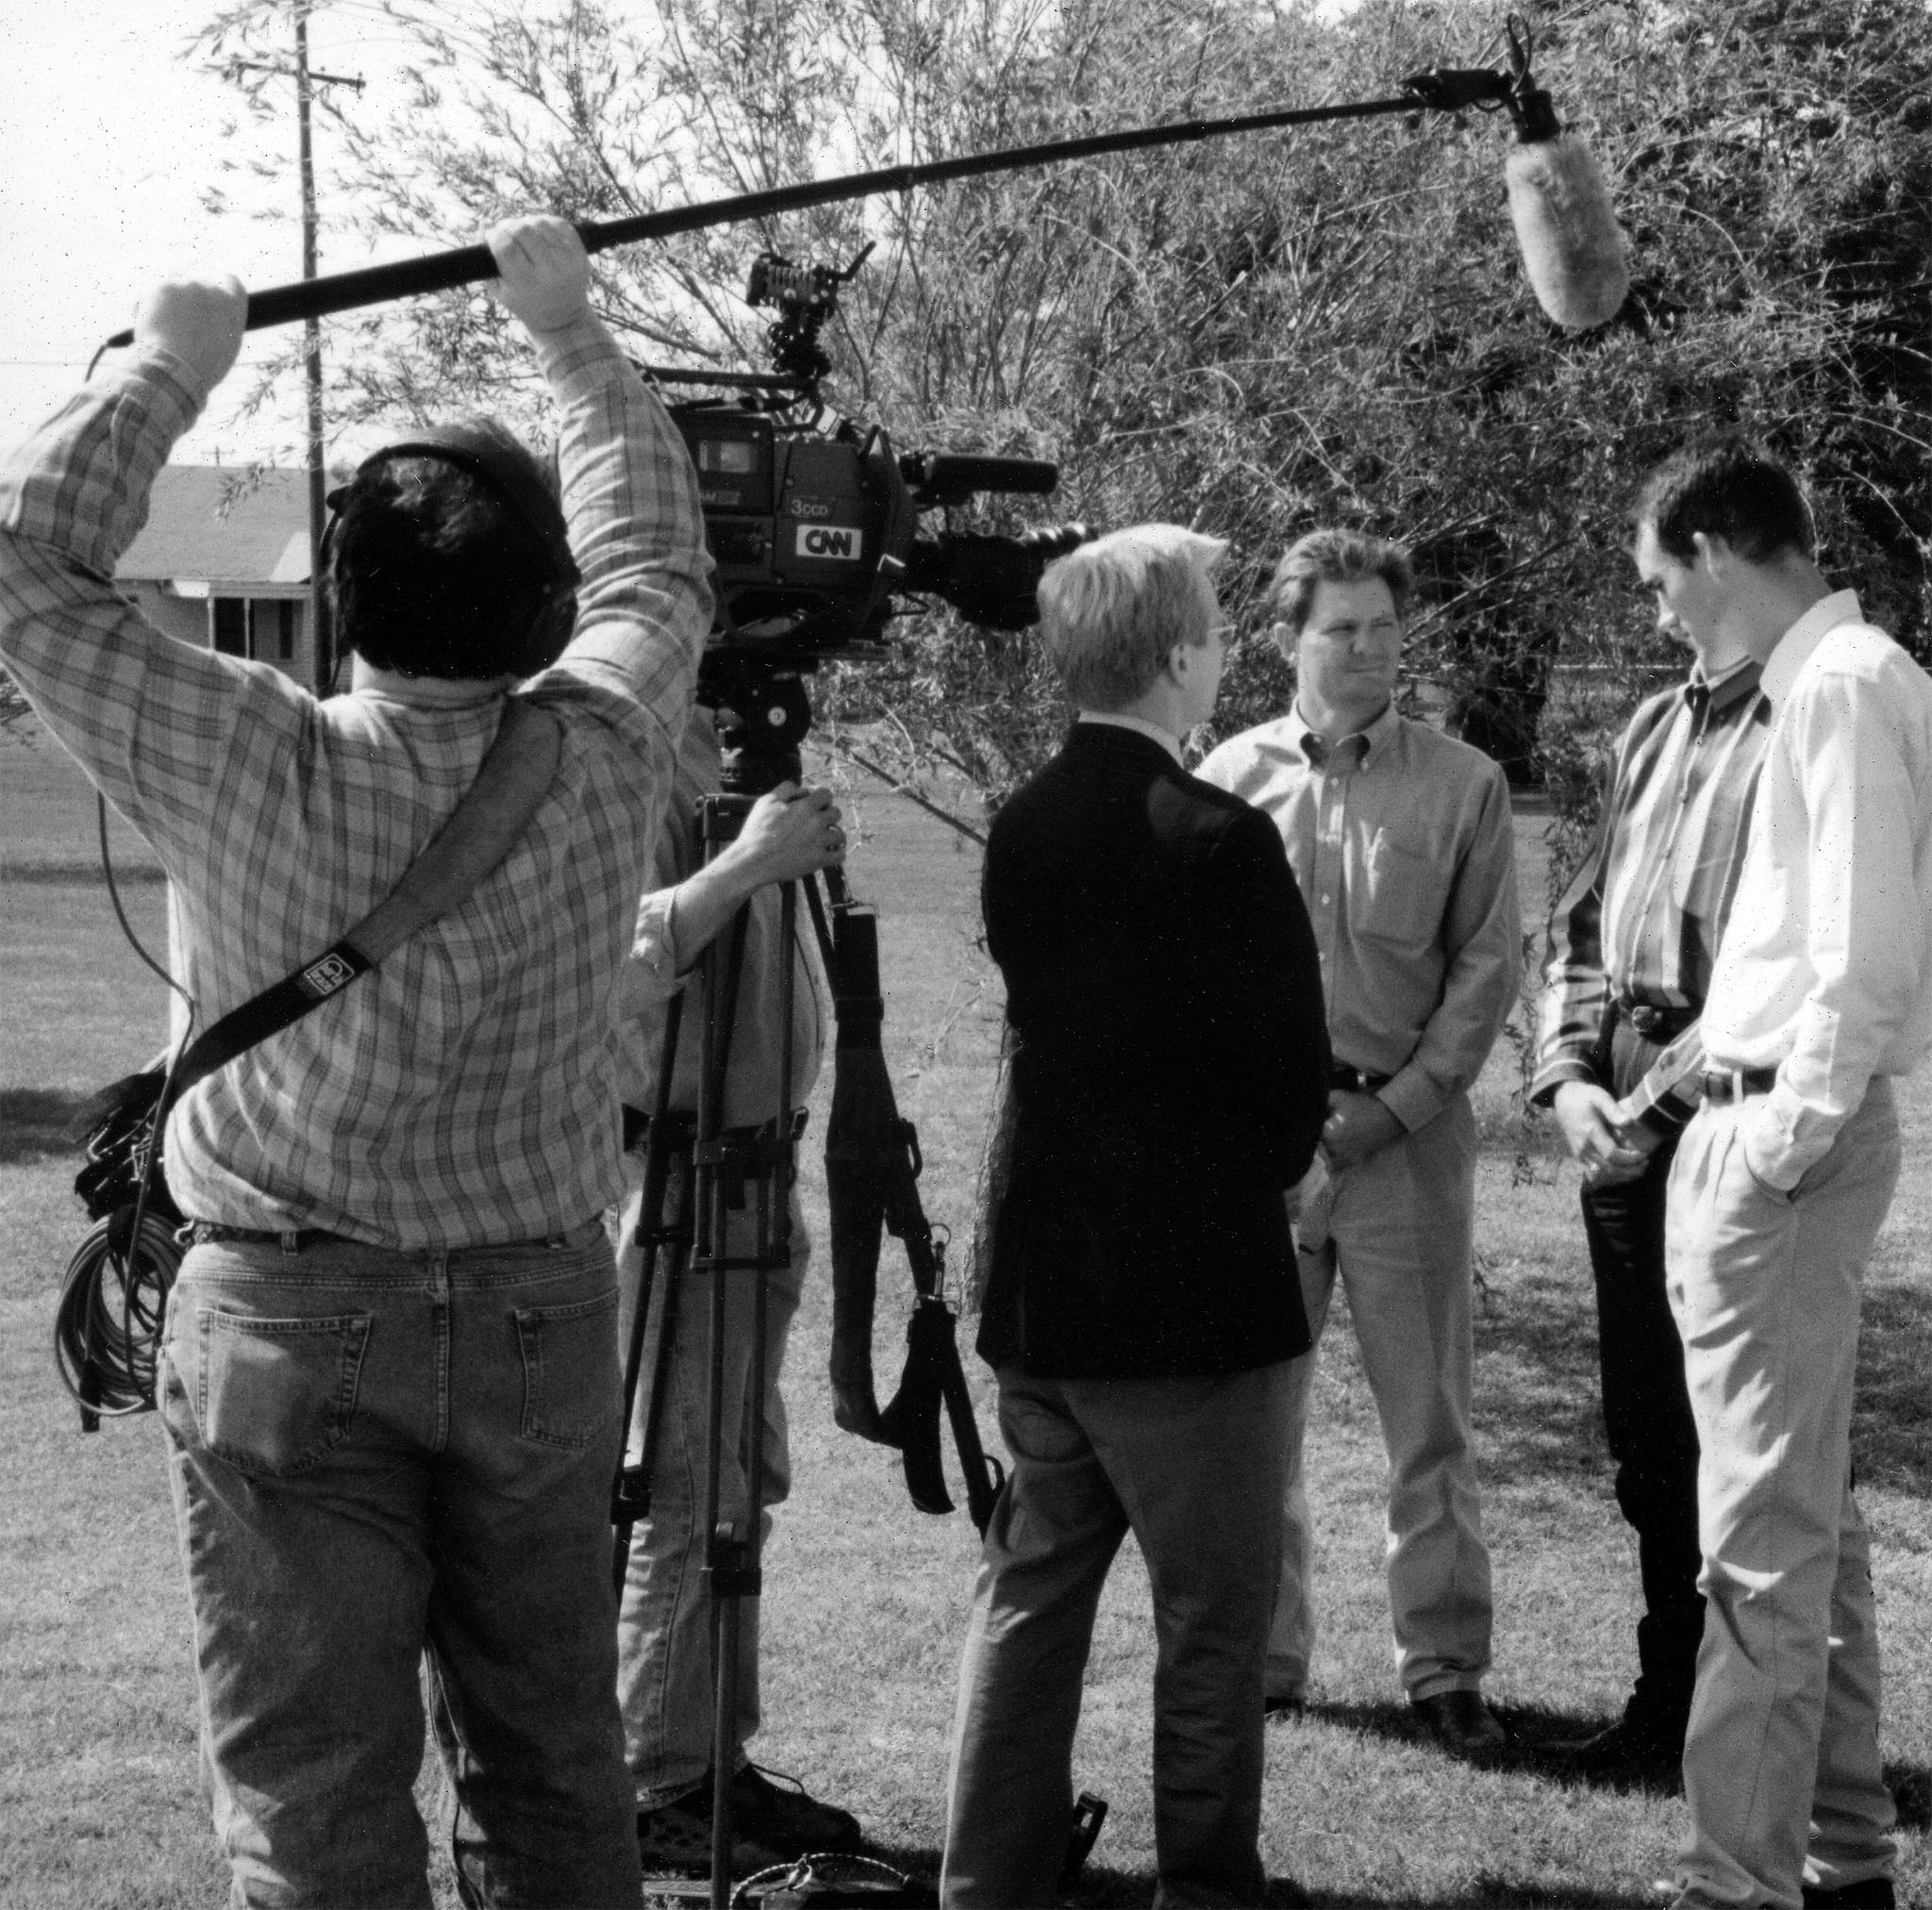 In this photo, CNN Newsman David Steck interviews OKFB Young Farmers & Ranchers members Tom Null, Keeff Felty and Matt Muller about weather forecasting’s impact on farming. The CNN crew was in Oklahoma on April 21, 1998, to videotape a story on severe weather awareness, and quizzed the YF&R members about any folklore-type indicators farmers recognized as precursors of storms.